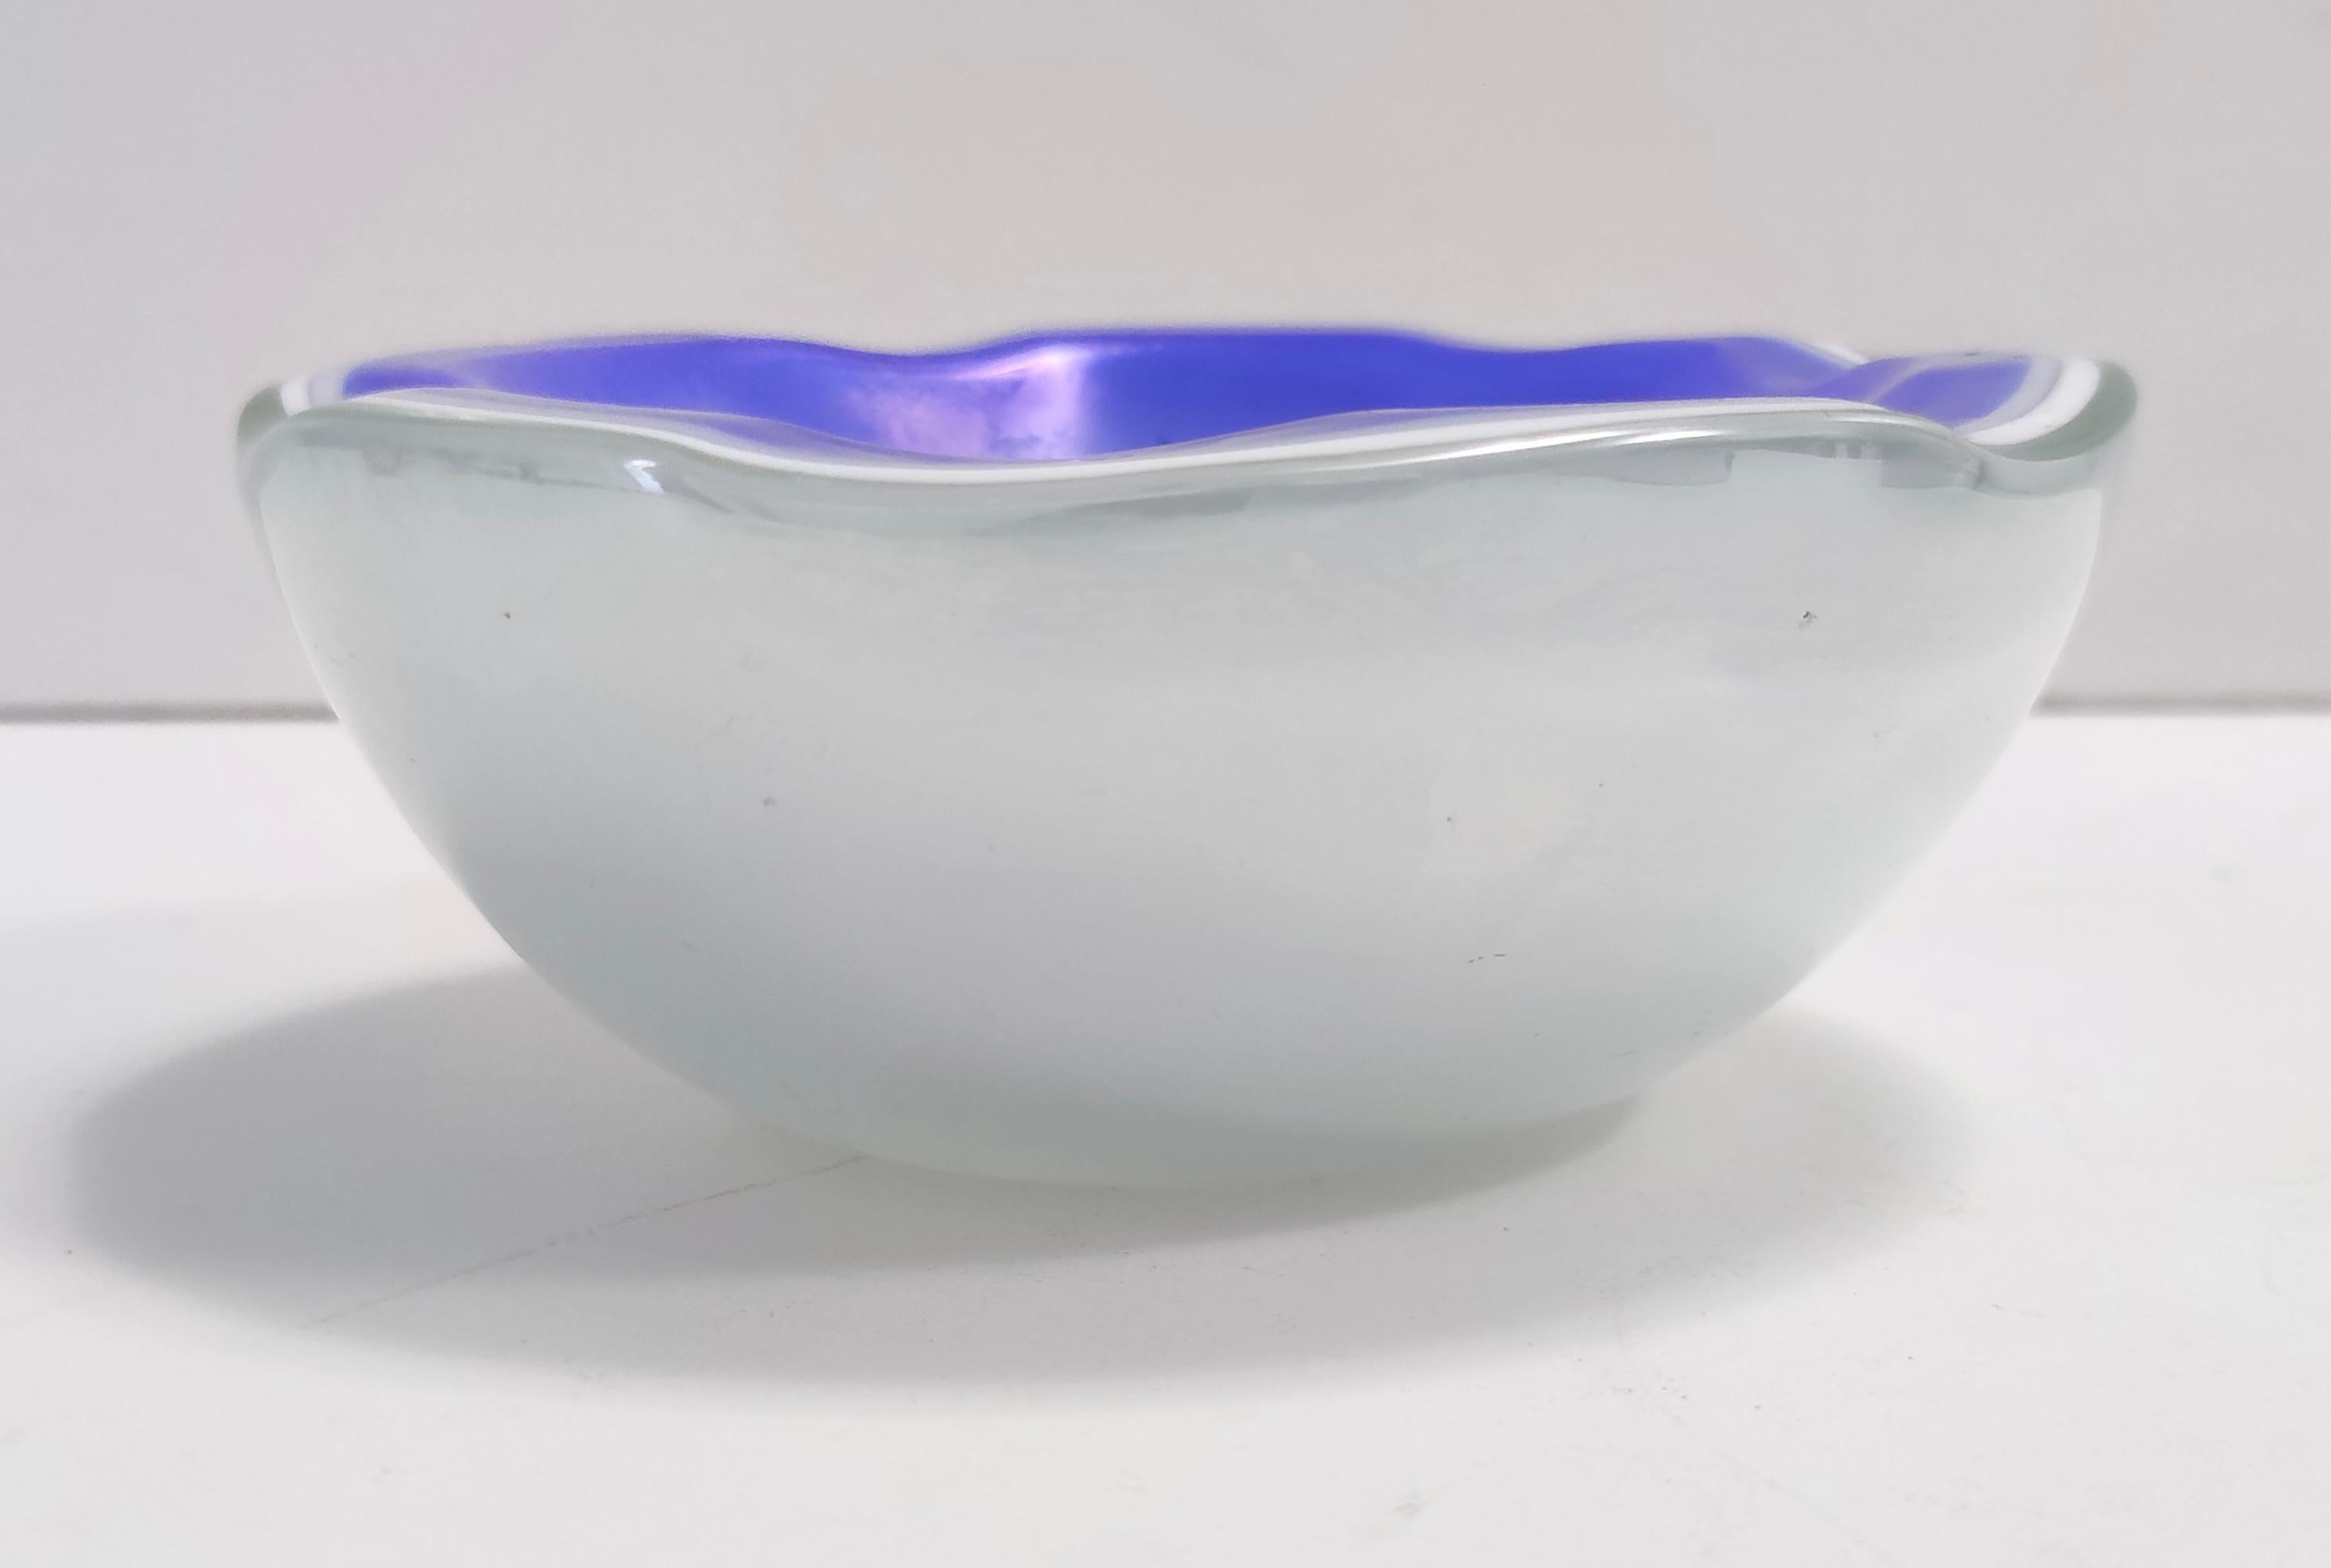 Vintage Iridescent Cornflower Blue and White Murano Glass Trinket Bowl - Ashtray In Excellent Condition For Sale In Bresso, Lombardy